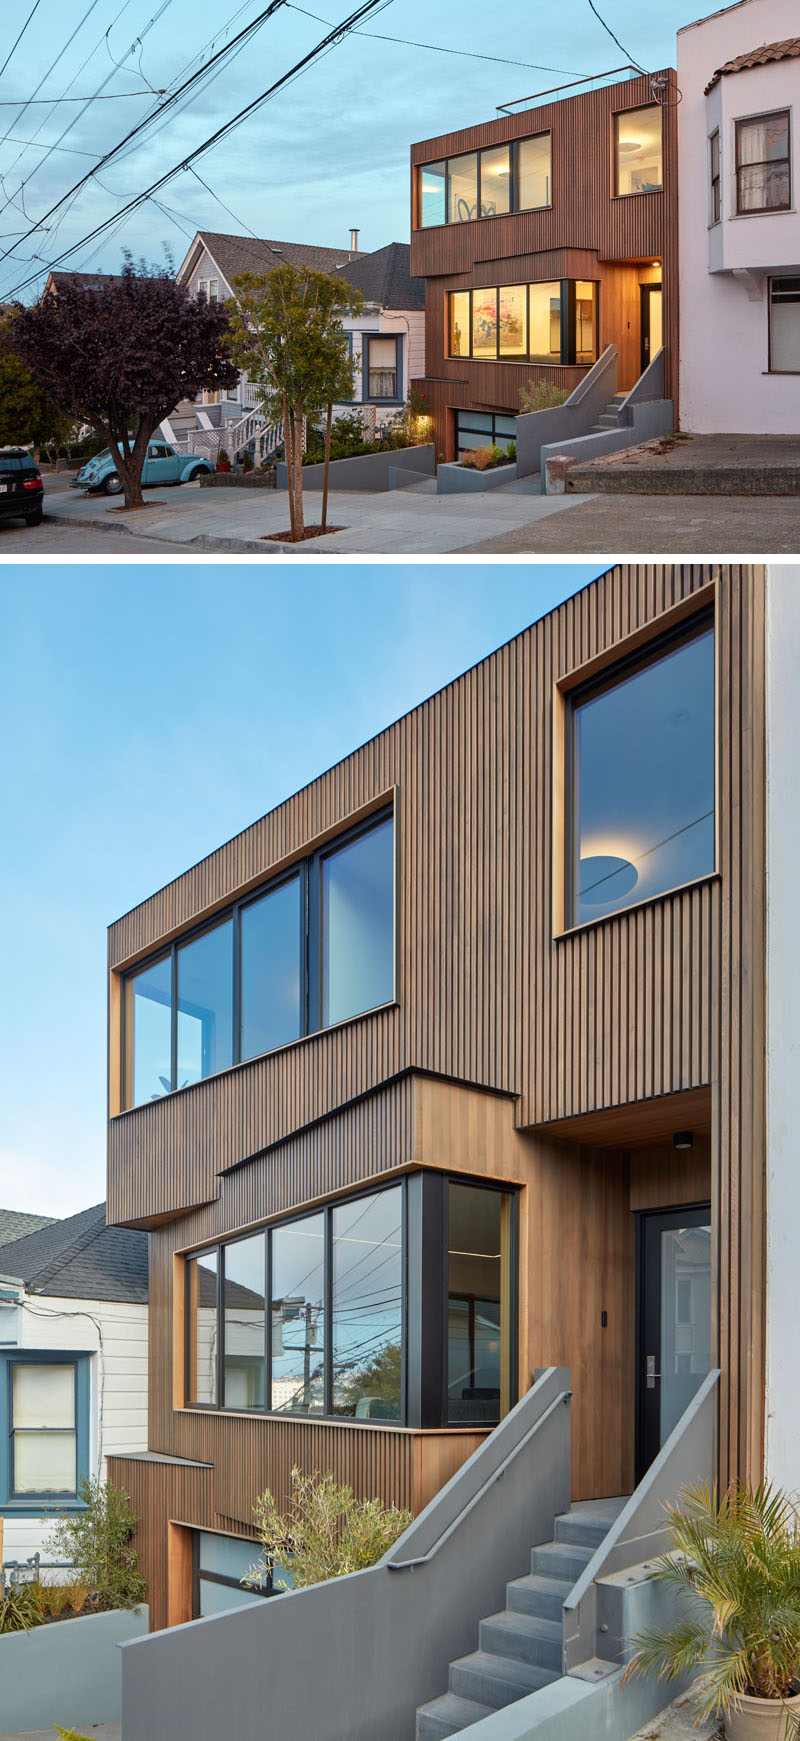 An Angular House Arrives On This Street In San Francisco